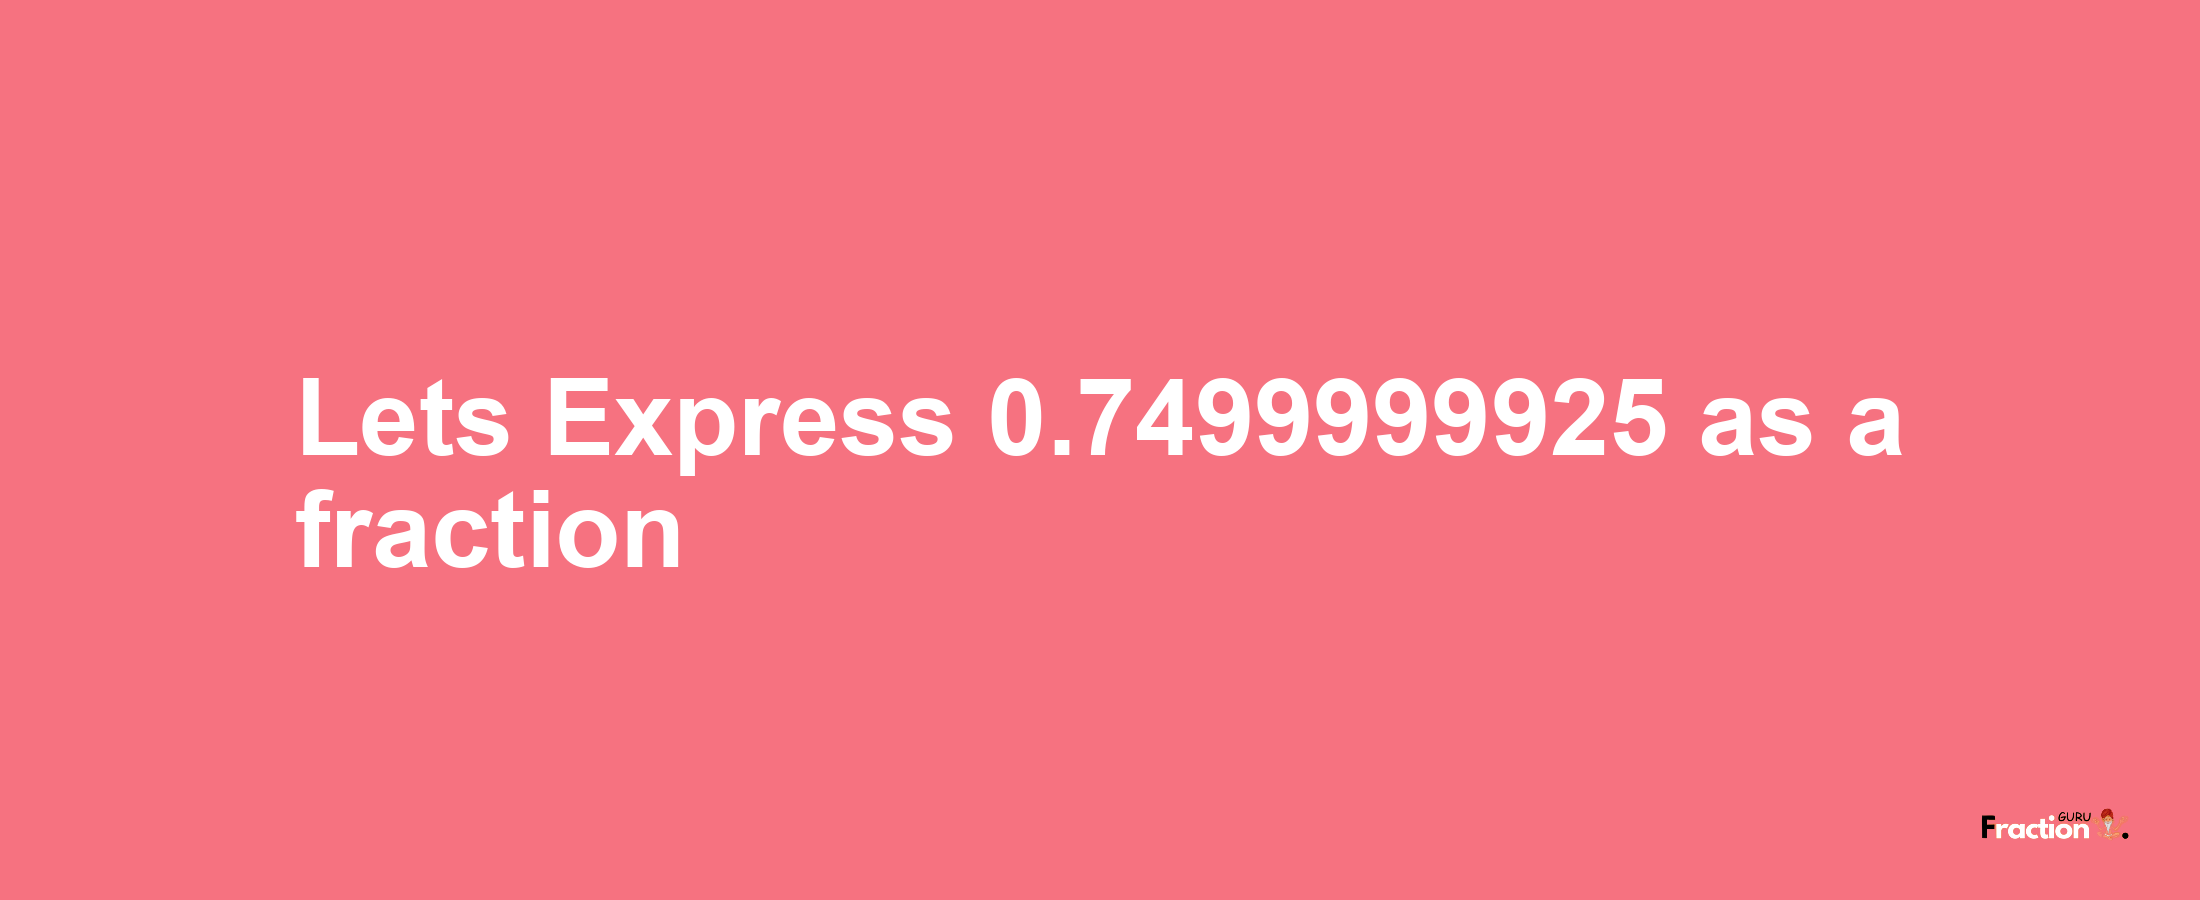 Lets Express 0.7499999925 as afraction